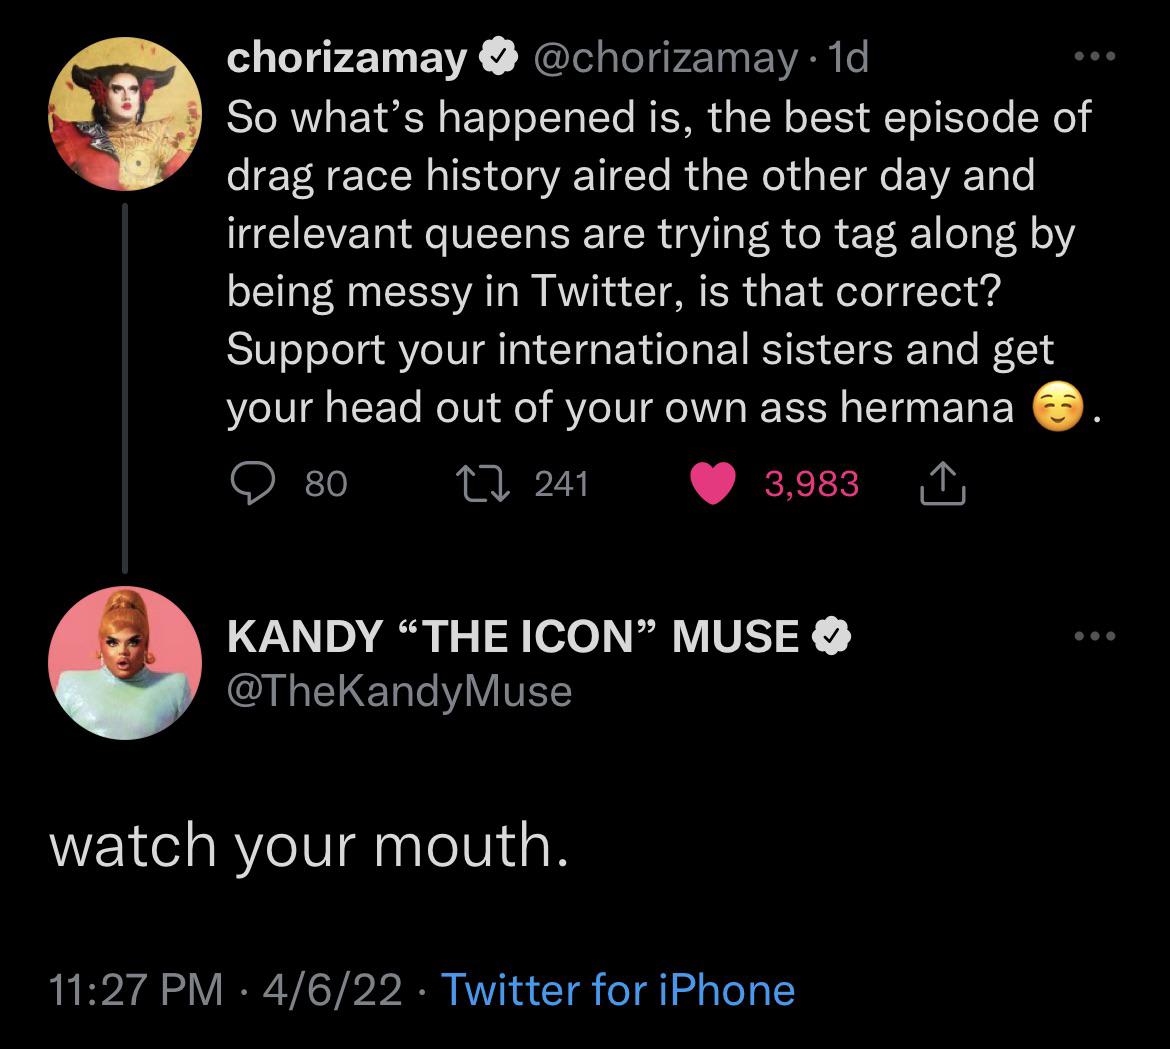 The talent show tweets continue: Miss Muse replies to Choriza